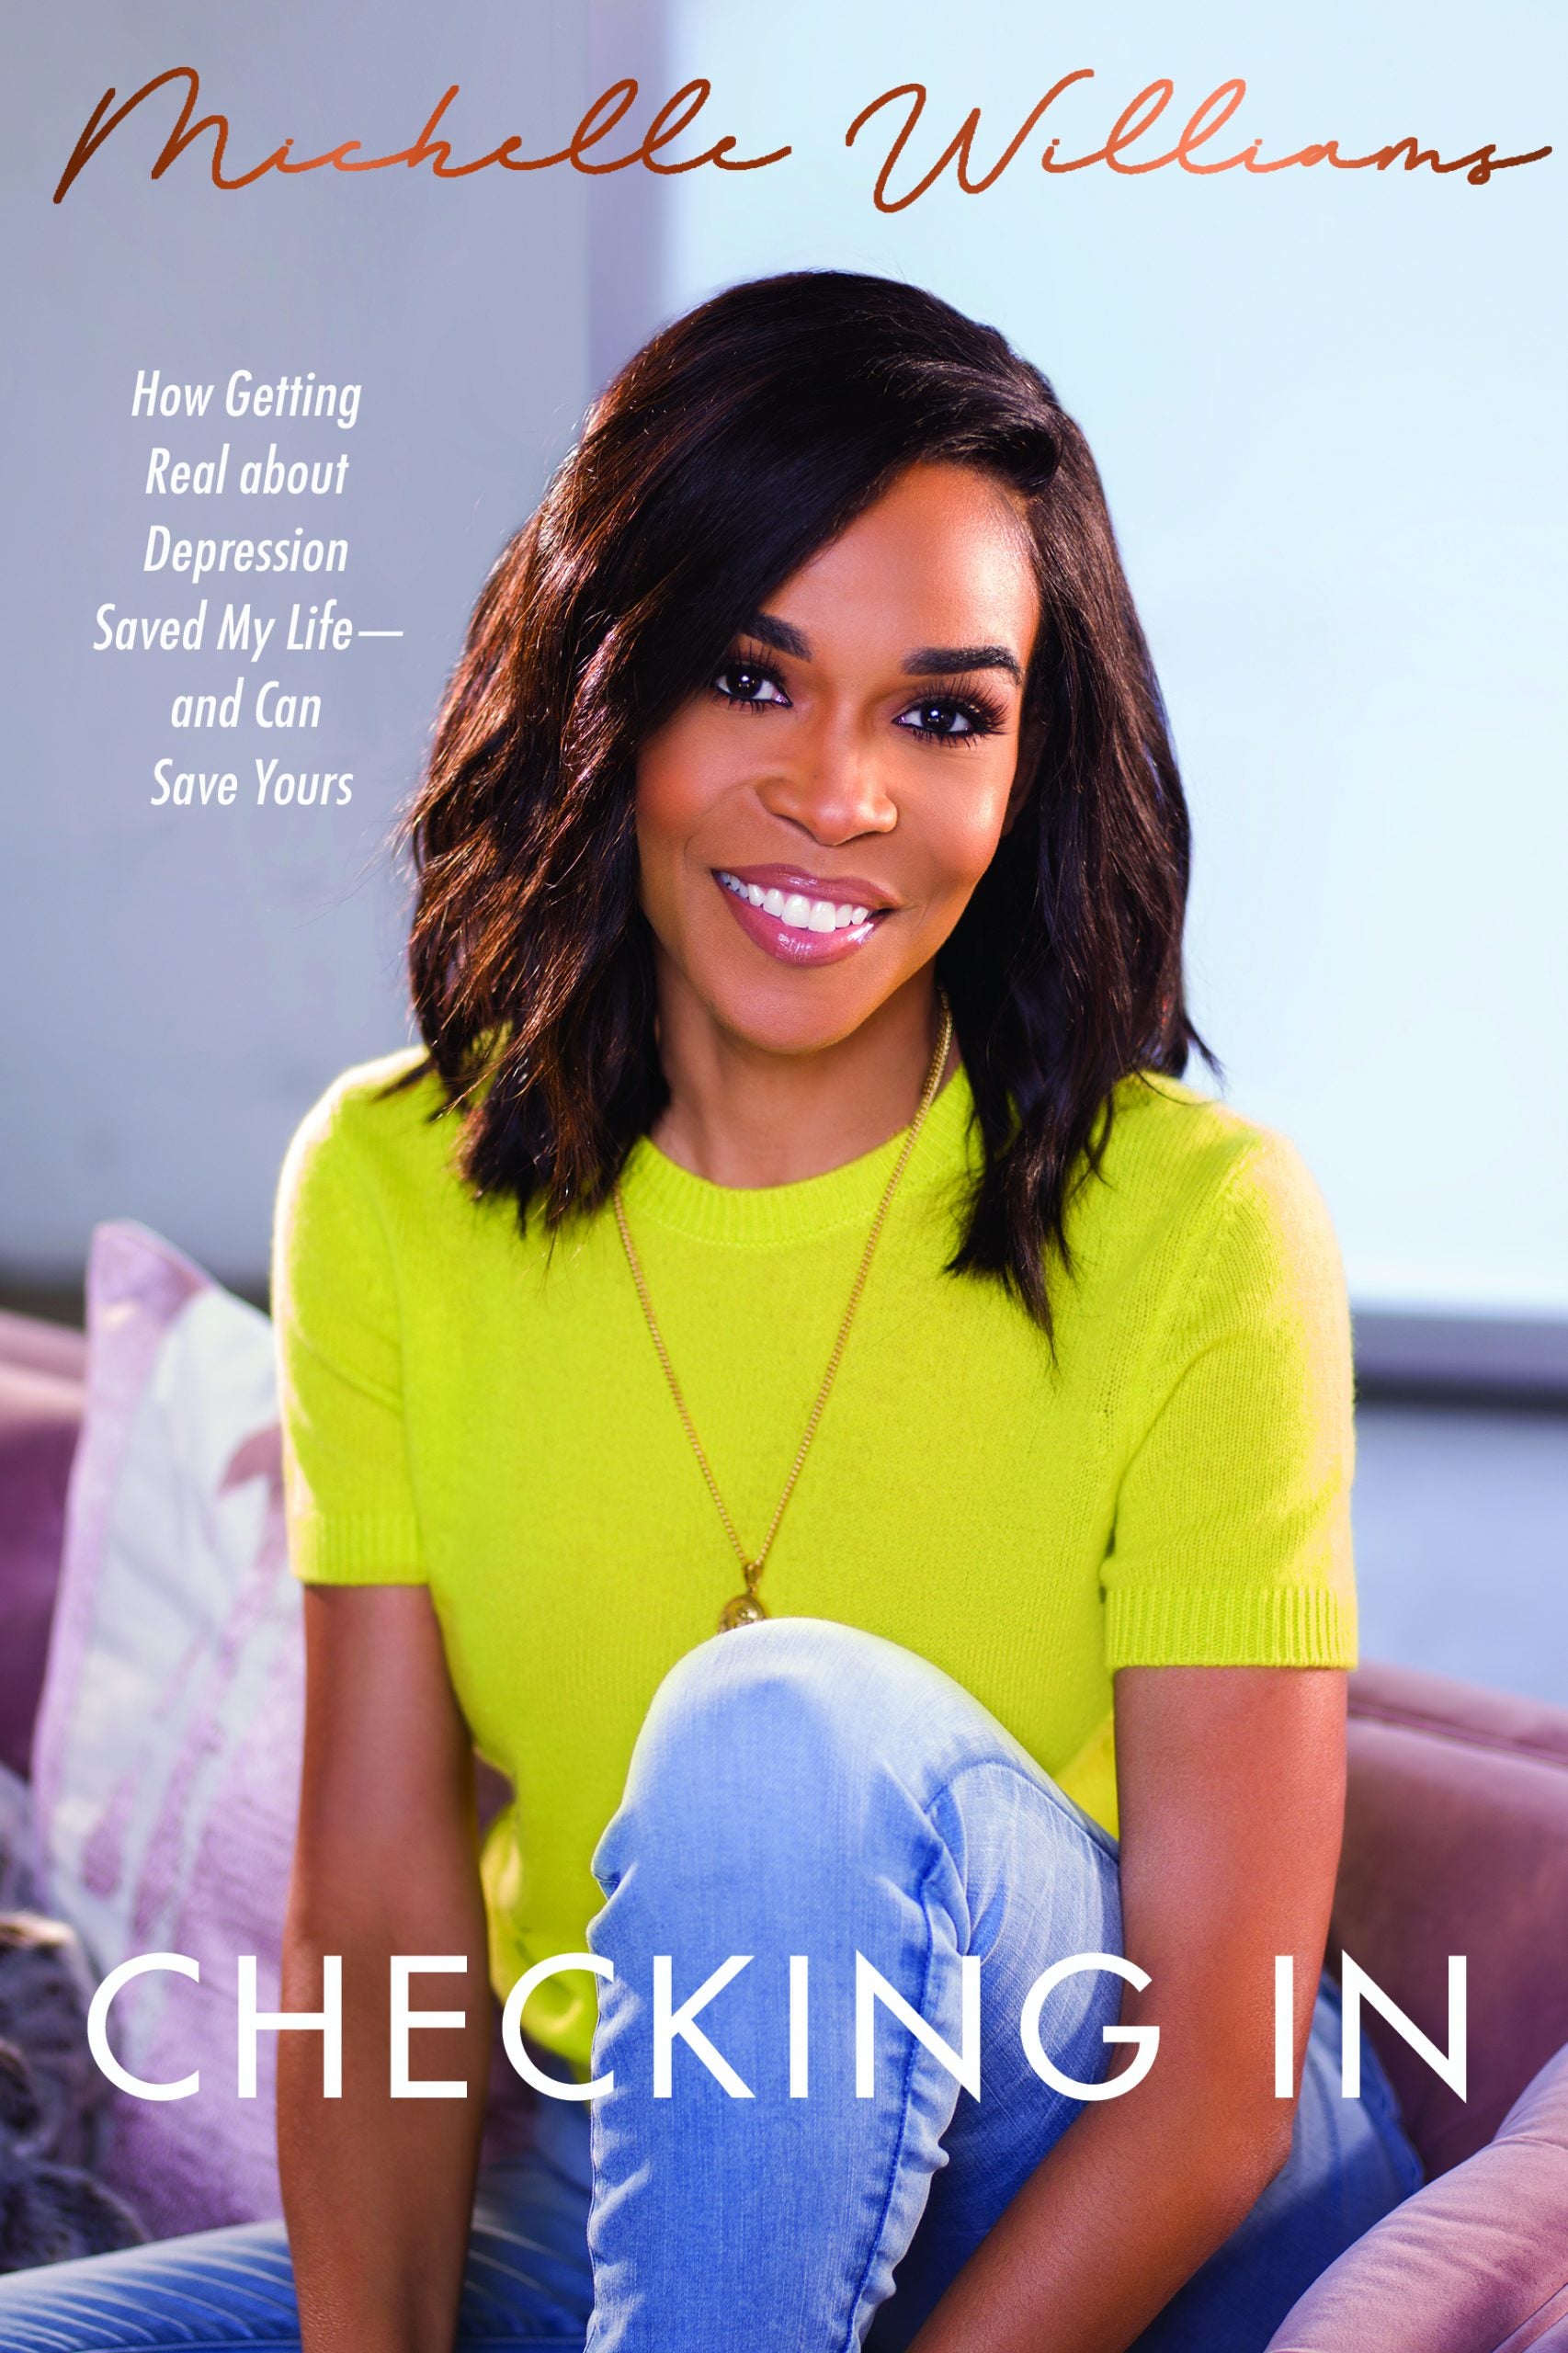 Exclusive: What To Expect From Michelle Williams’ Heartfelt New Memoir, ‘Checking In’